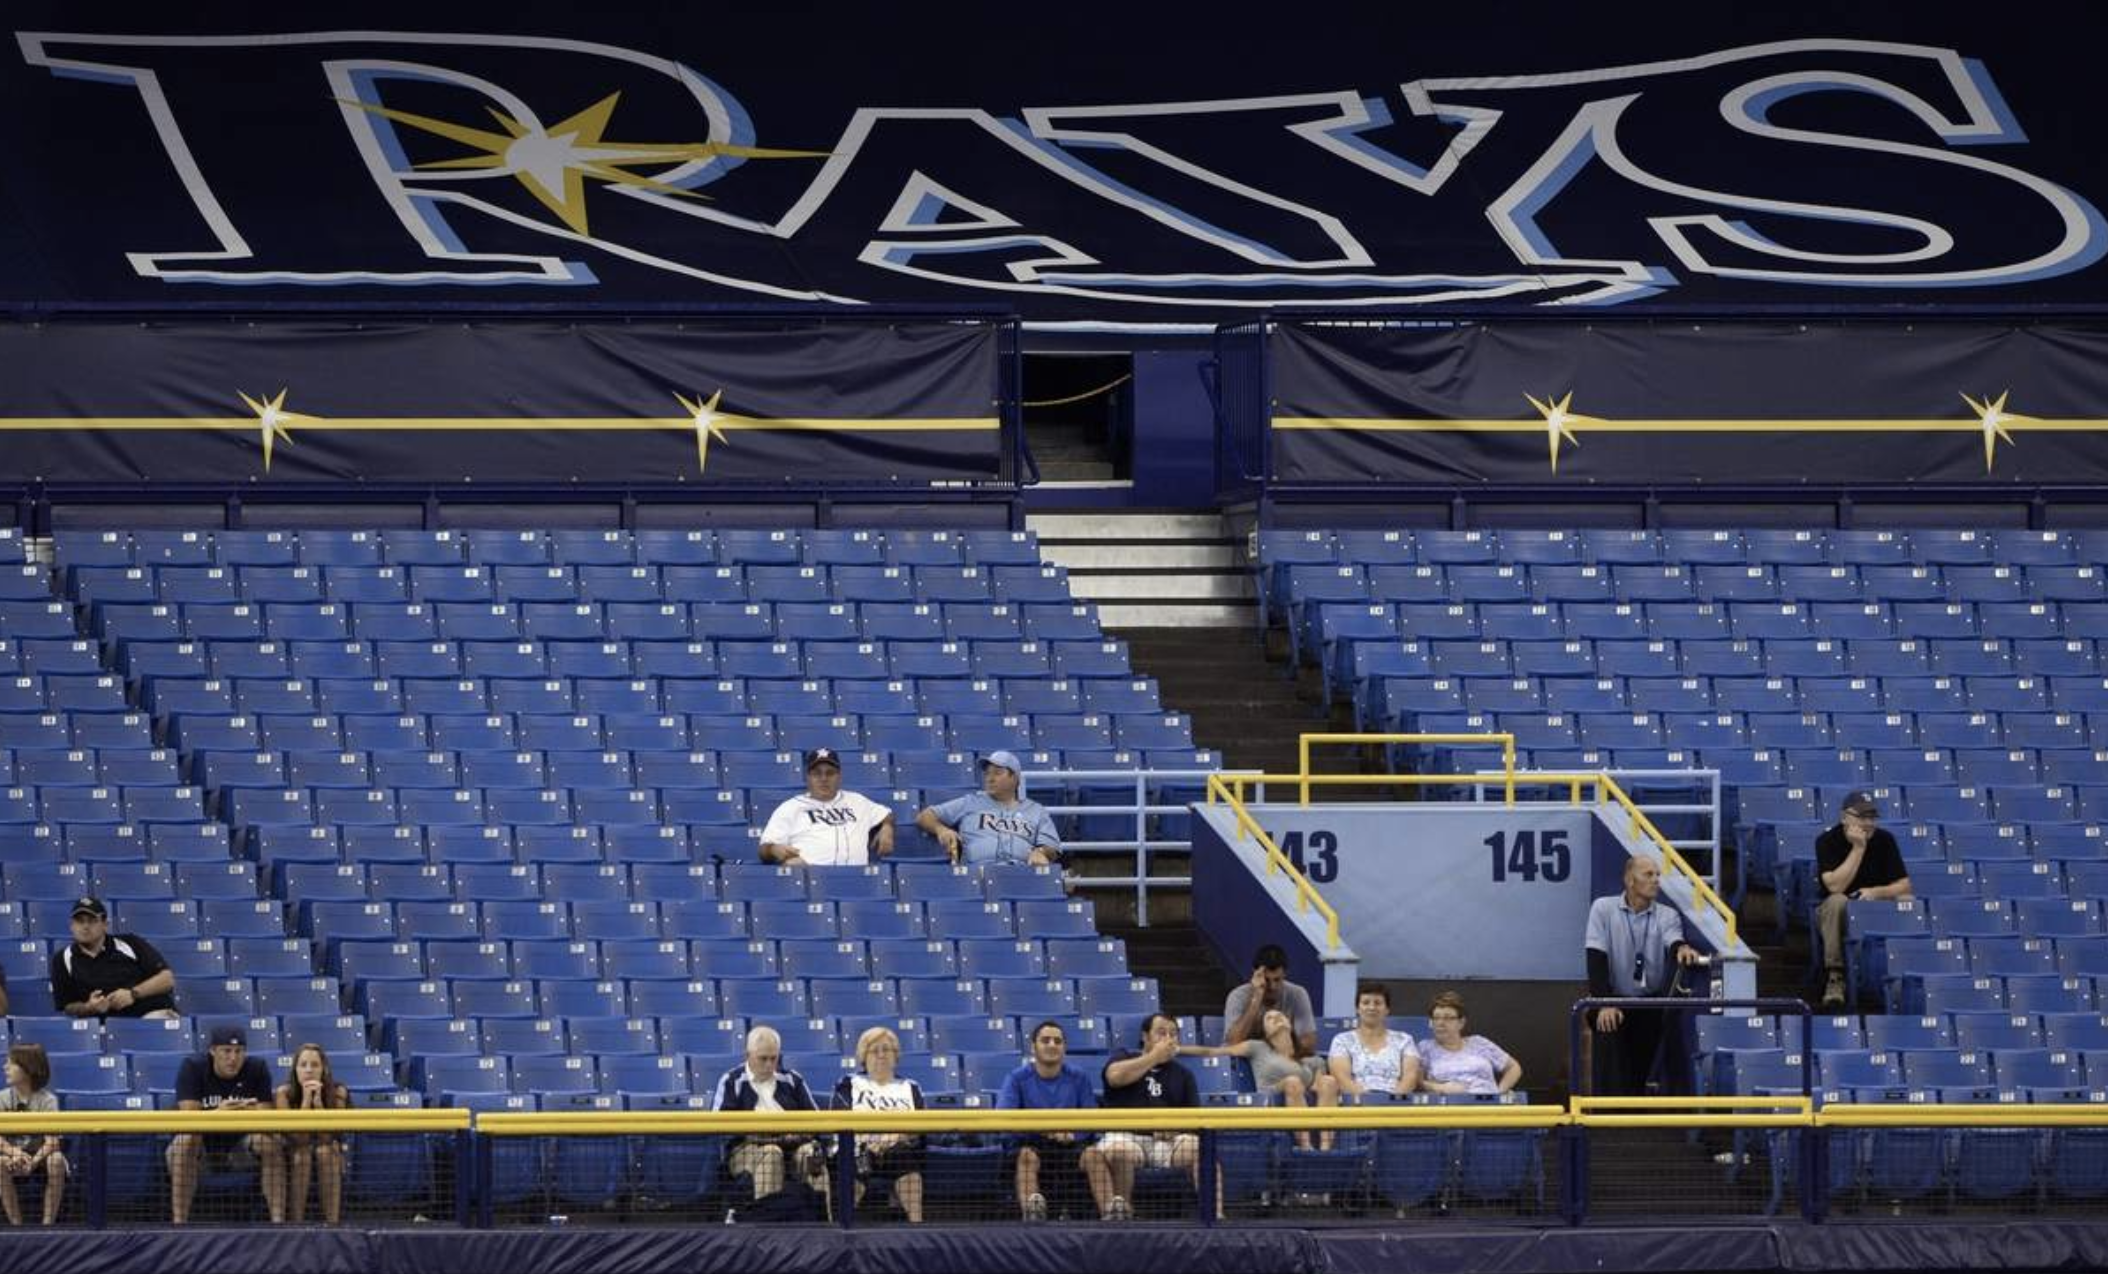 The Worst Seats at Tropicana Field - $14 Experience / Tampa Bay